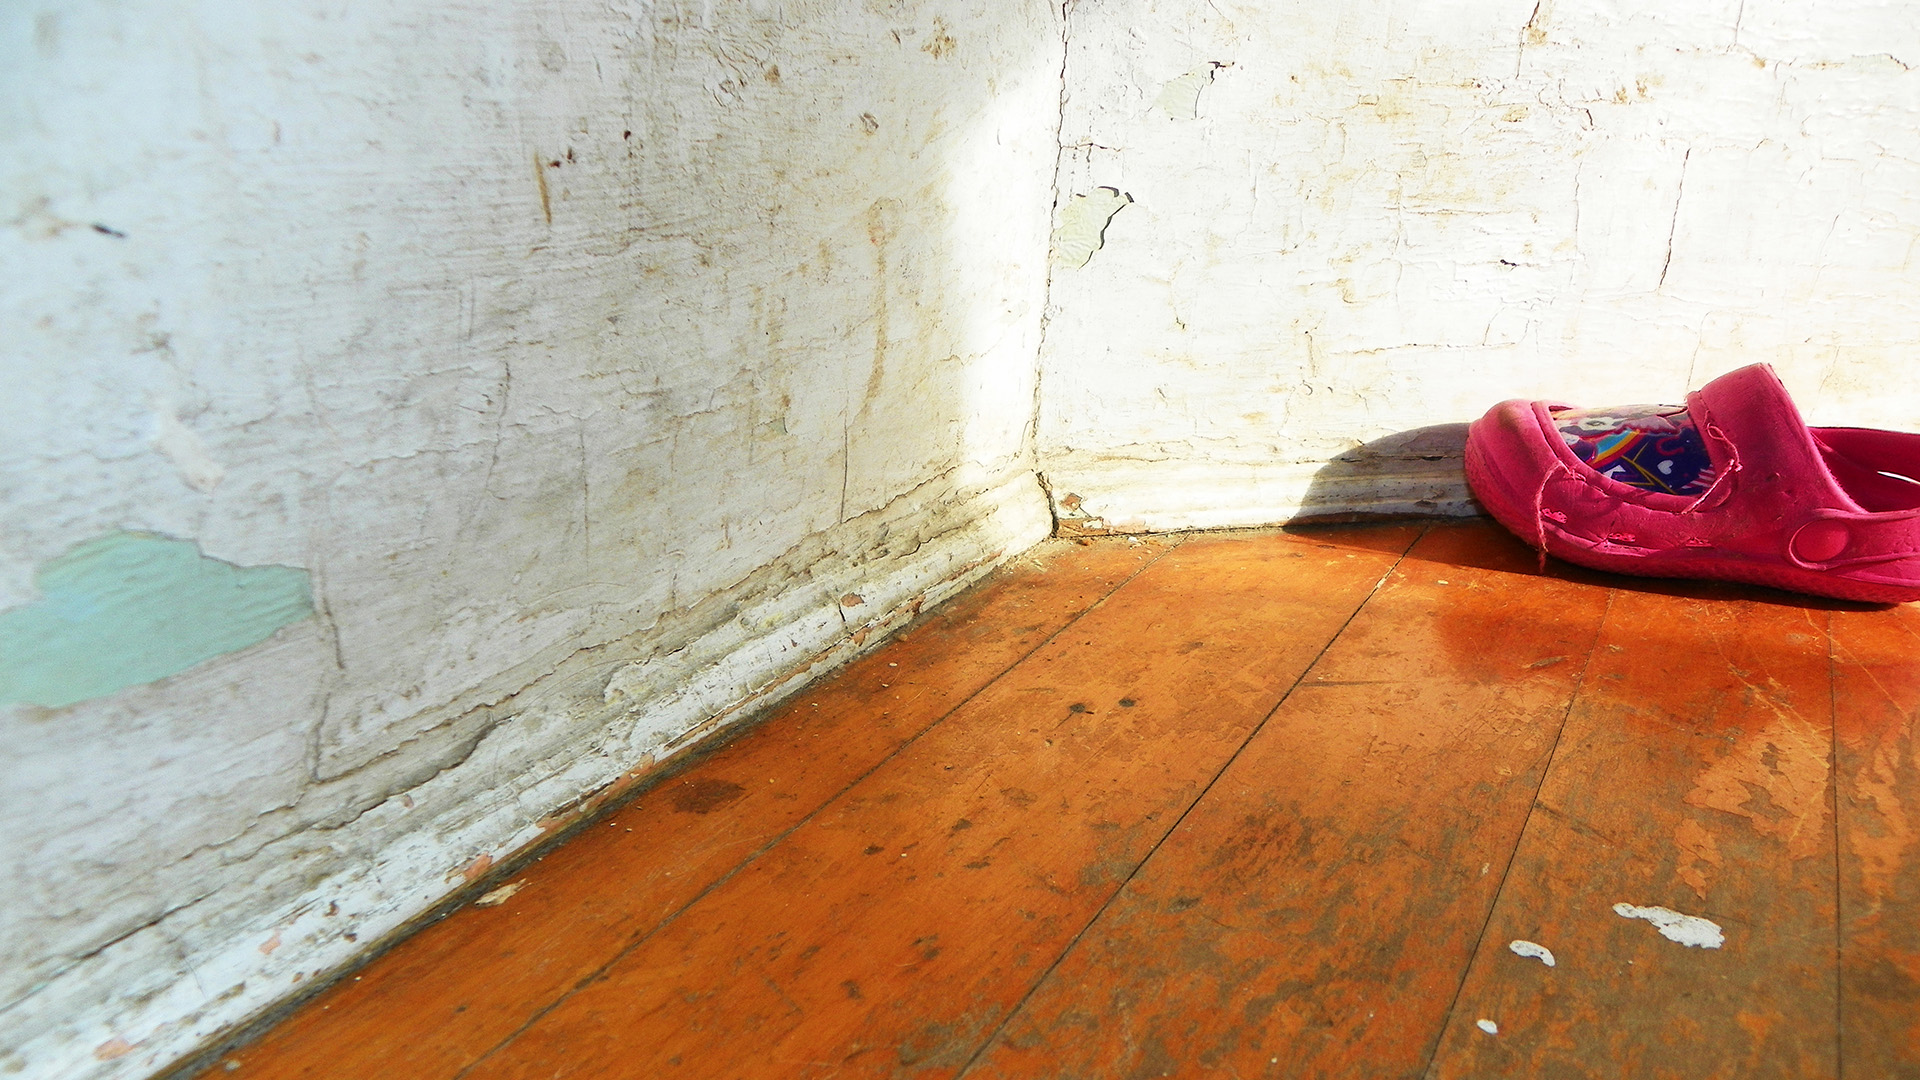 A single shoe sits on a wooden floor next to a corner of two walls with cracked and peeling layers of paint.